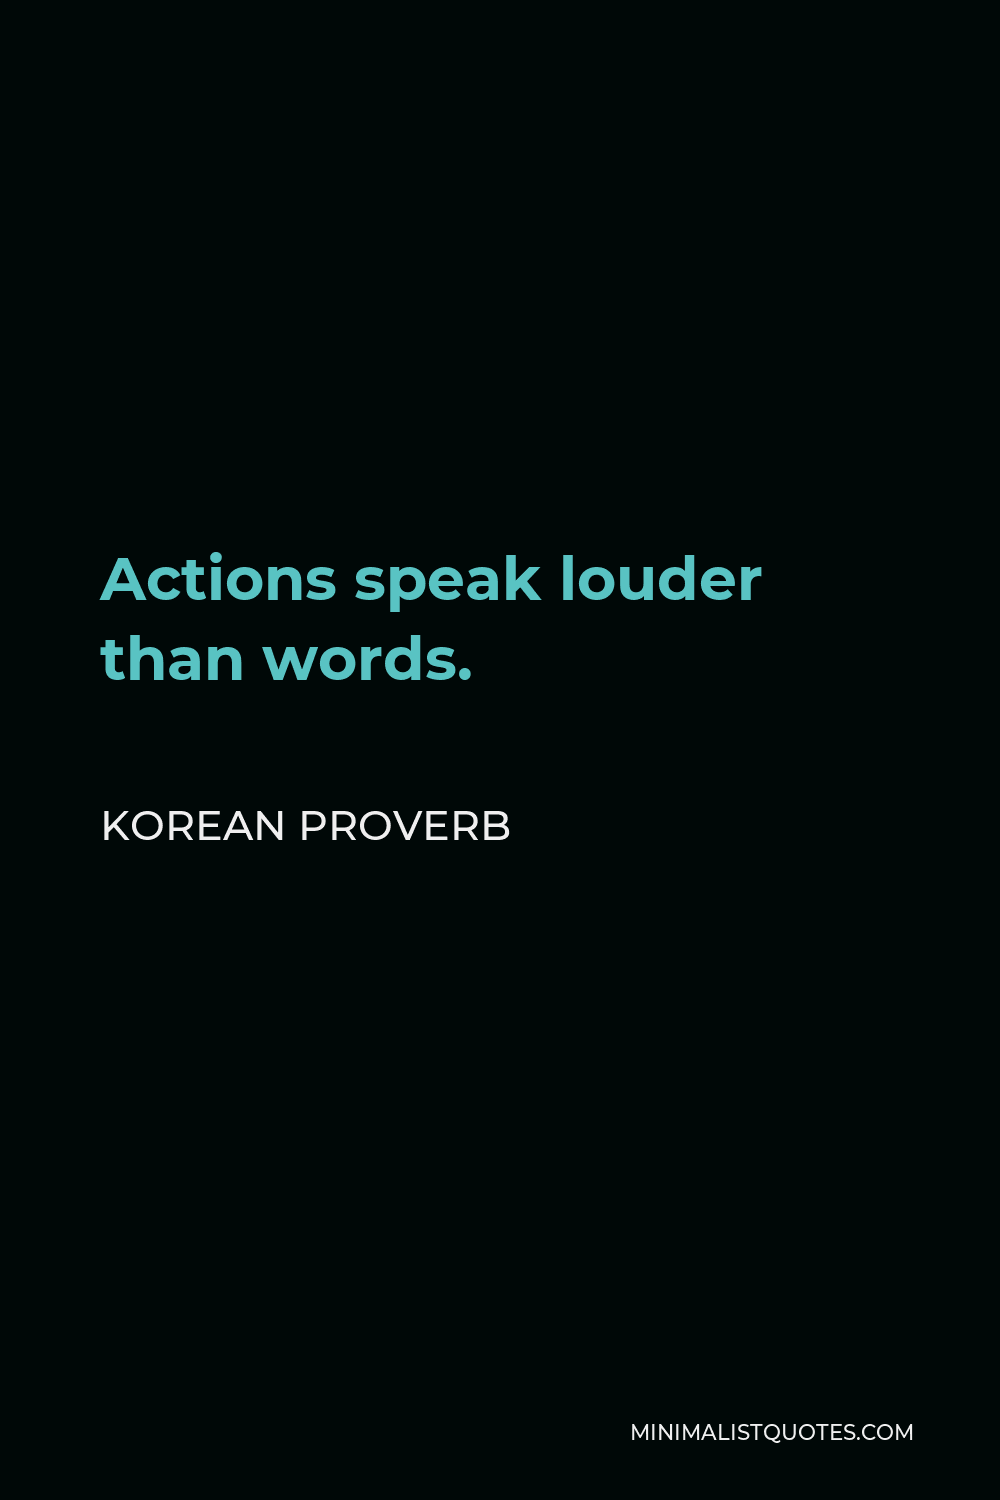 Korean Proverb Quote - Actions speak louder than words.